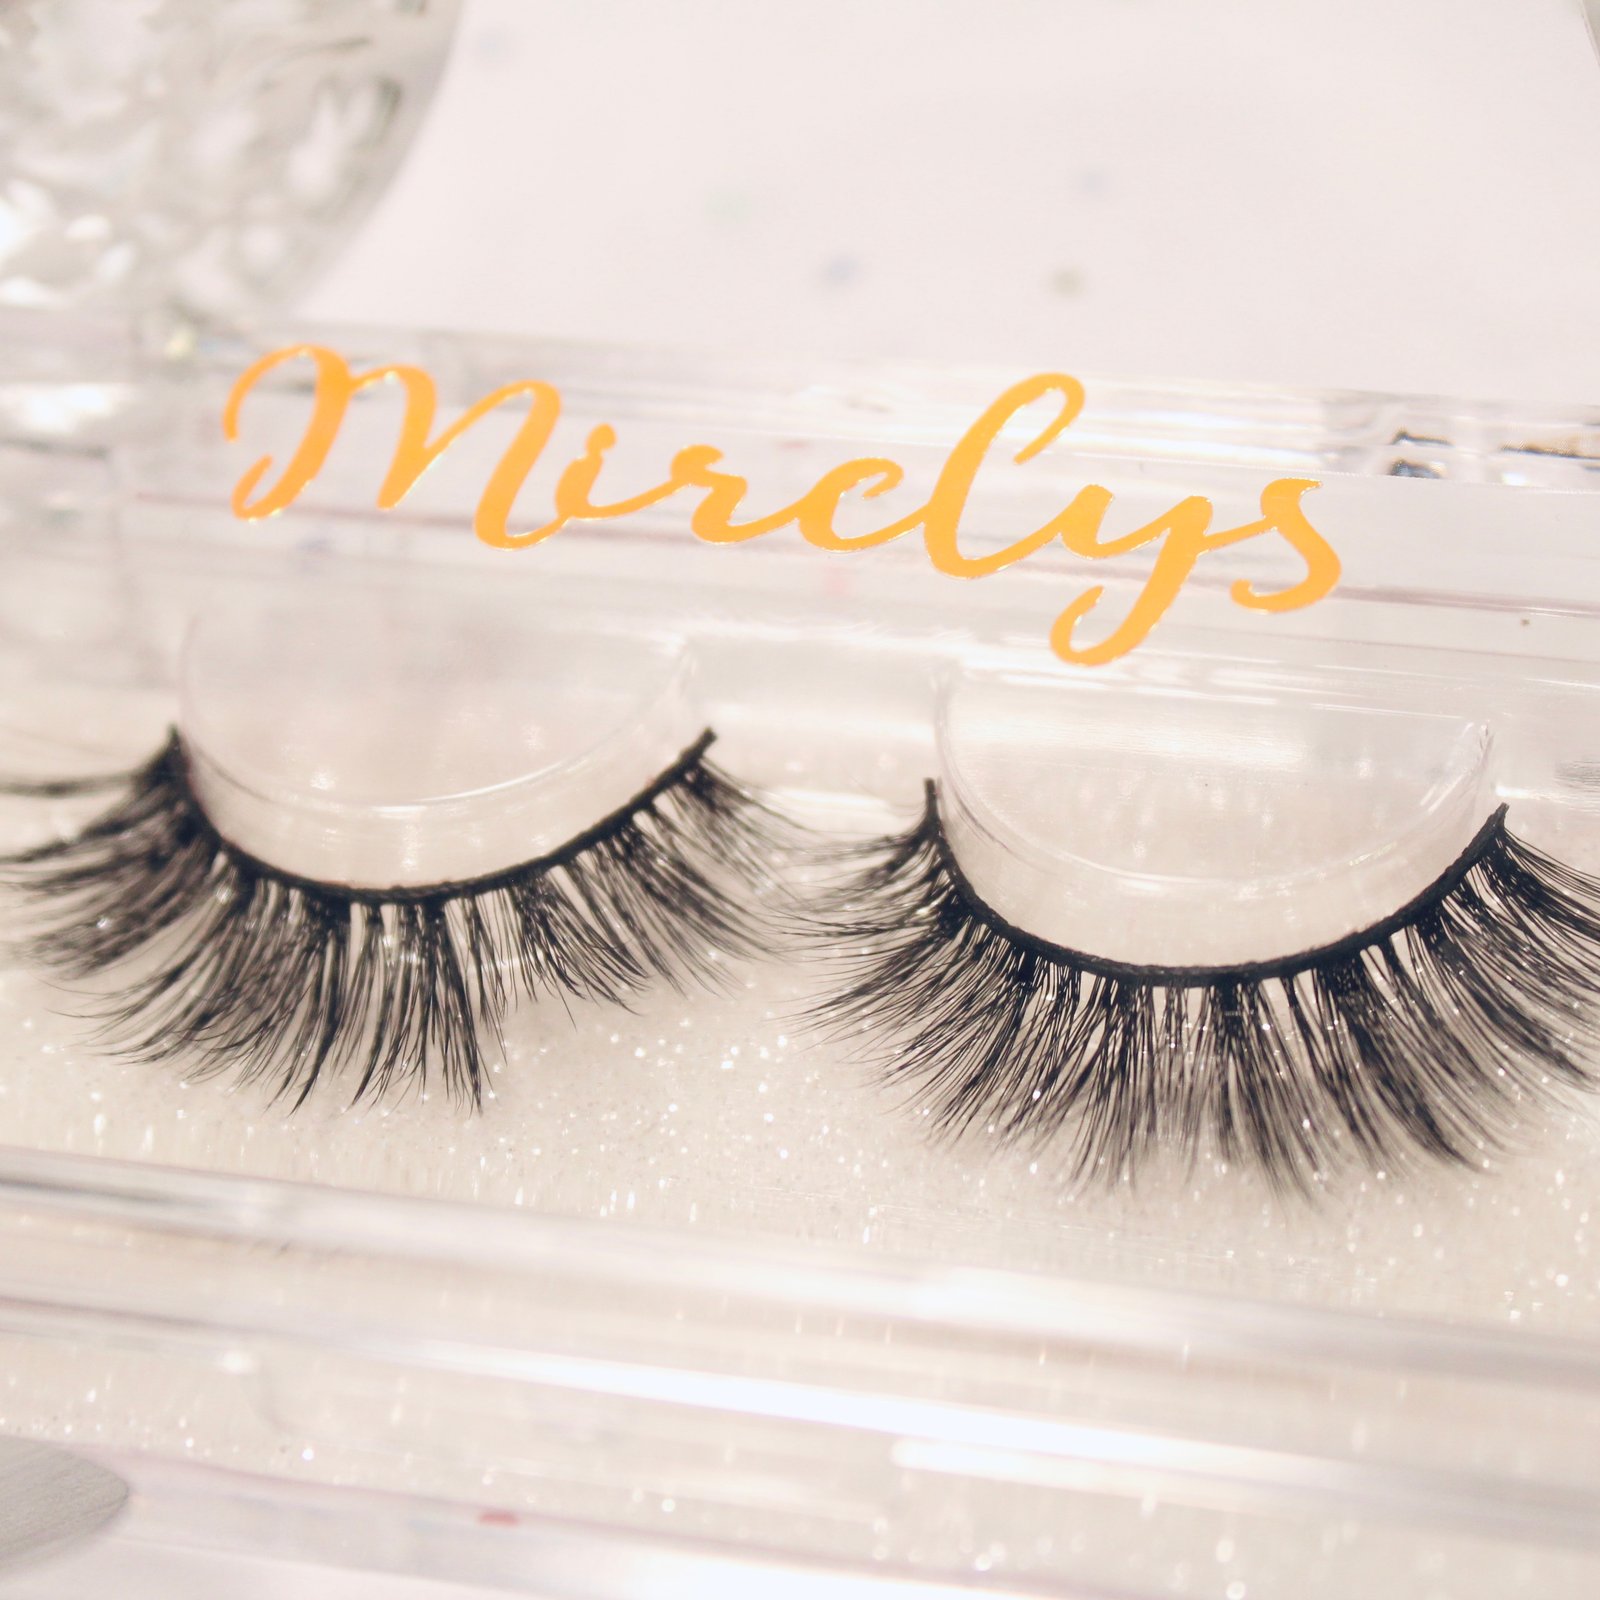 flutter lashes coupon code 2015